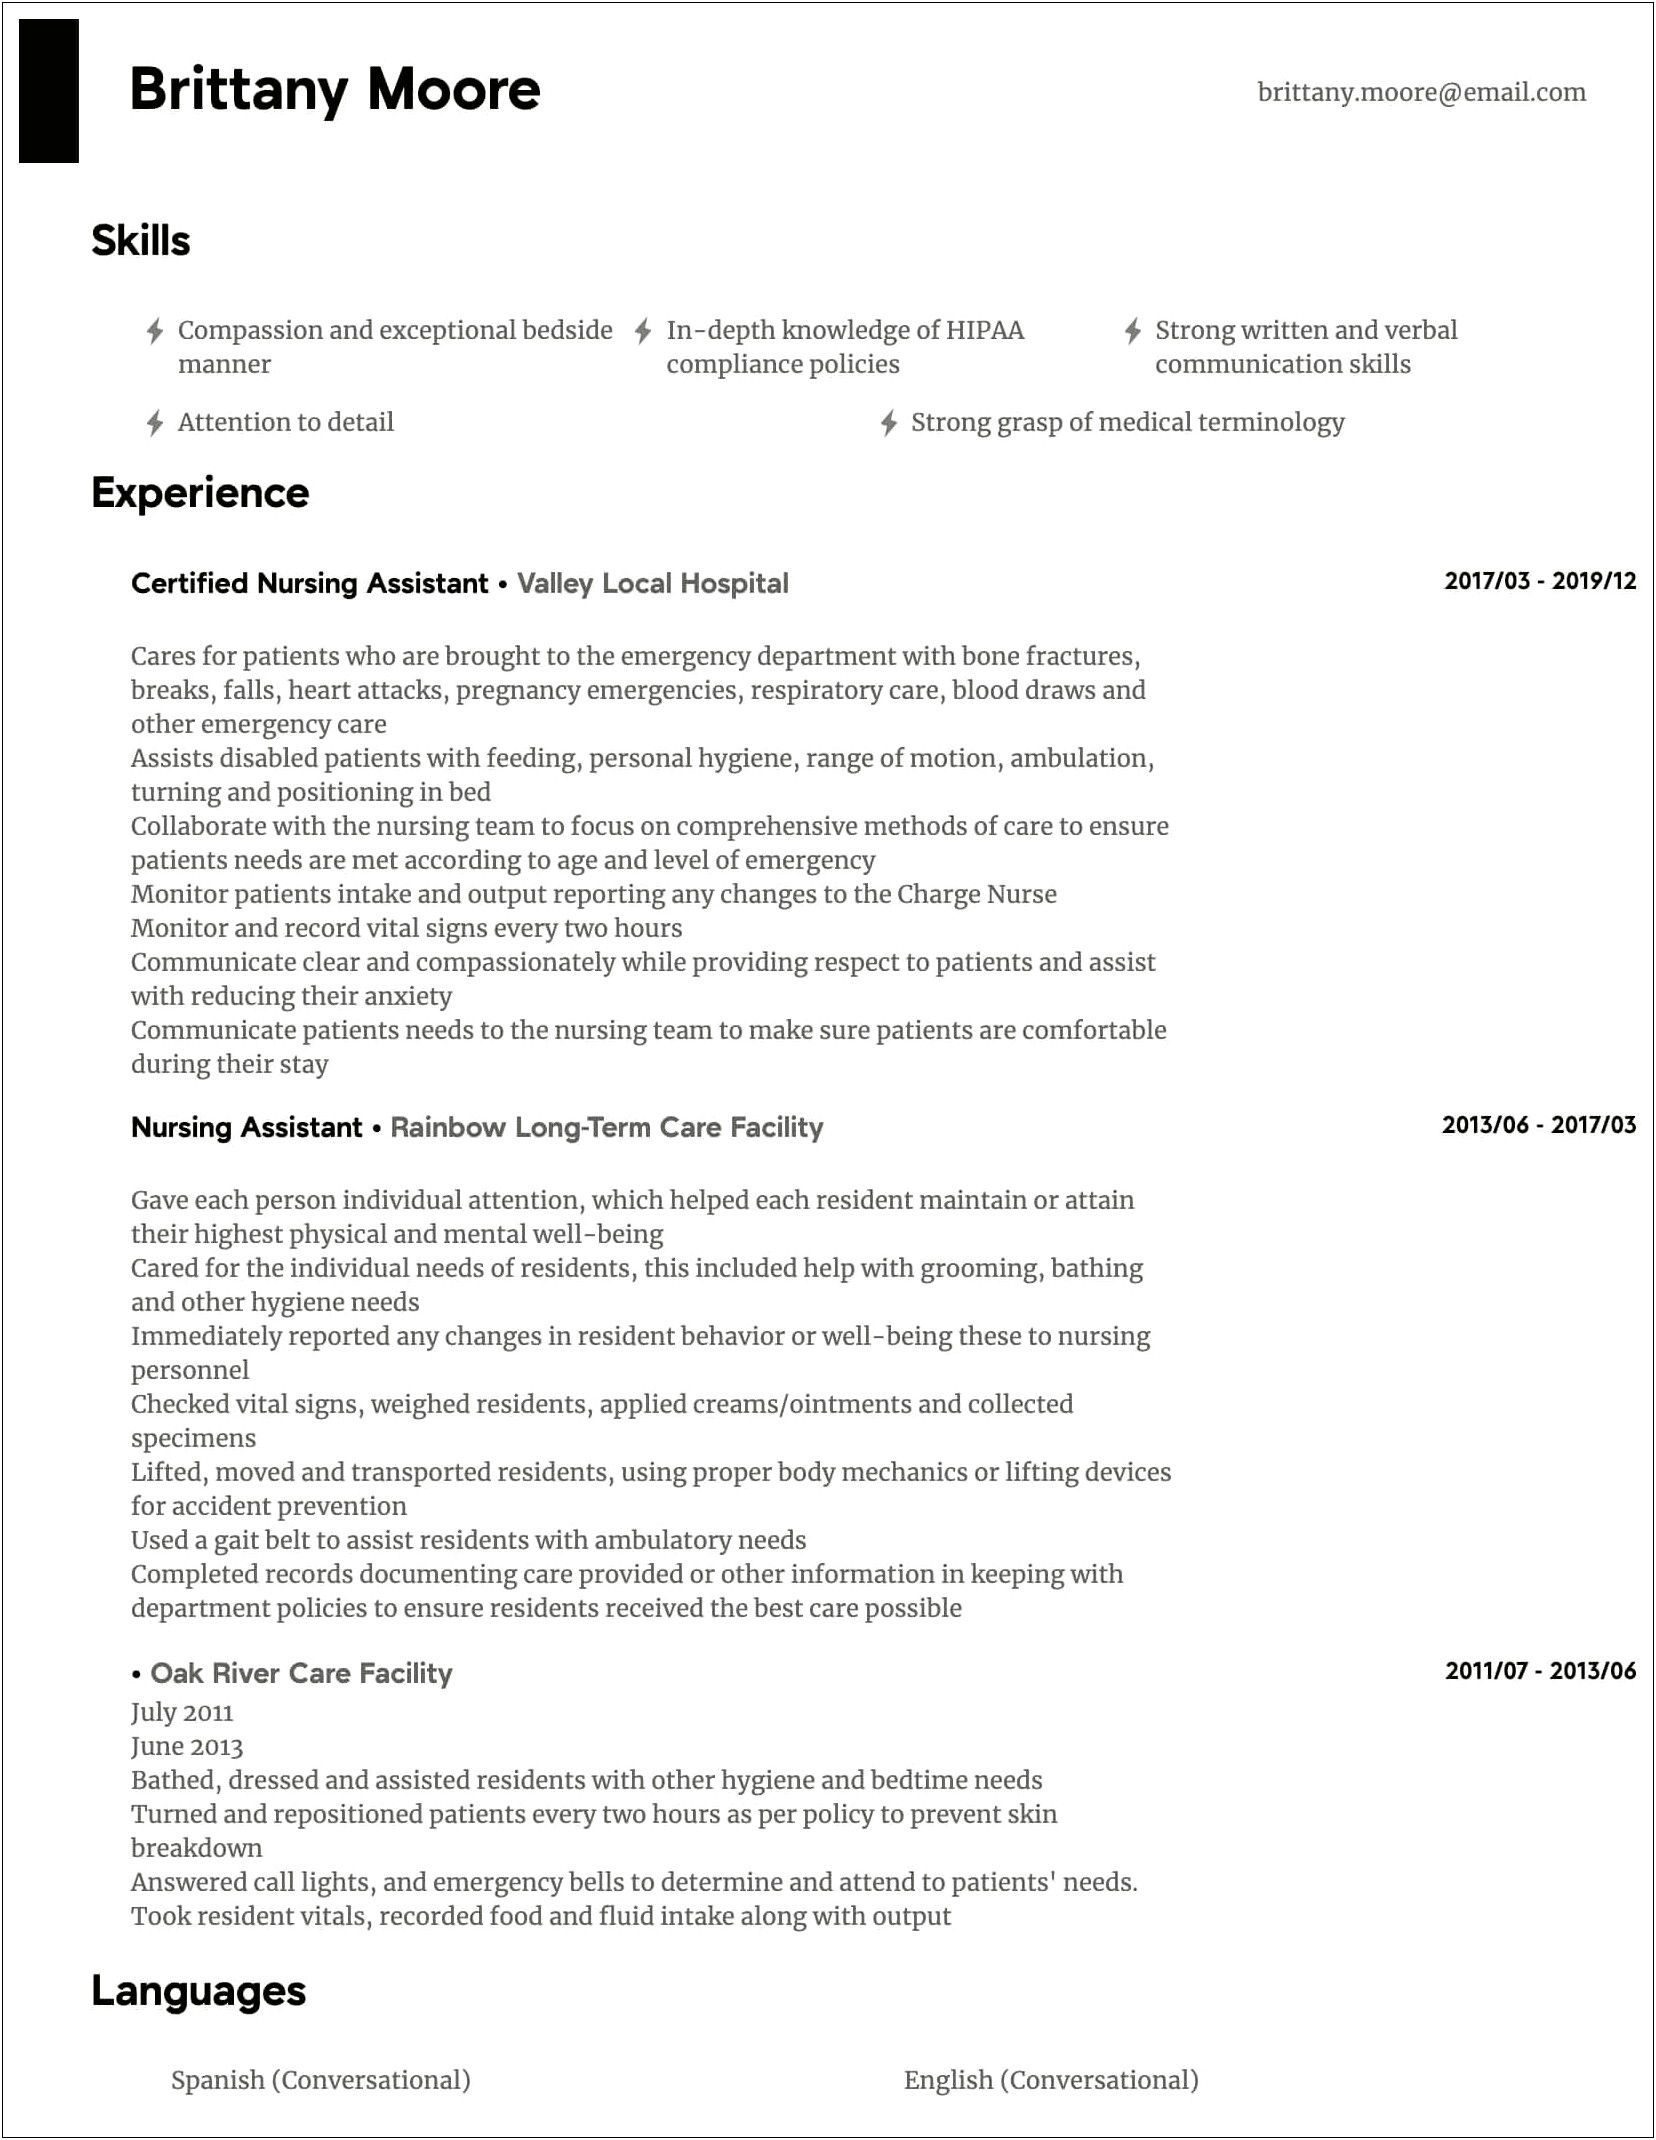 Sample Resume For Experienced Nursing Assistant